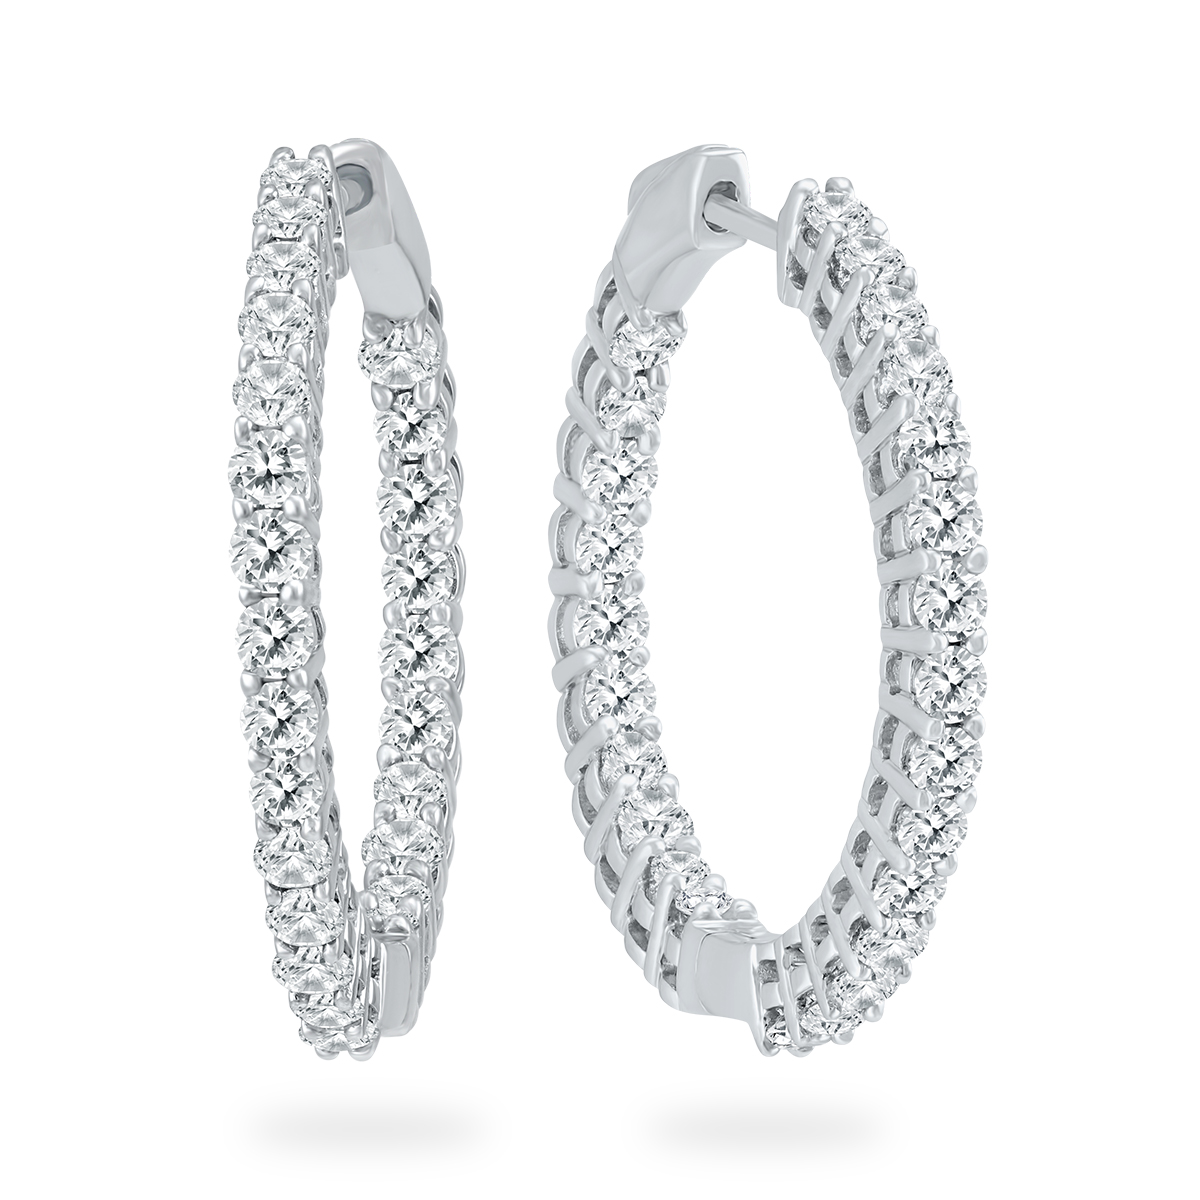 AGS Certified 3 Carat TW Round Diamond Hoop Earrings with Push Down Button Lock in 14K White Gold